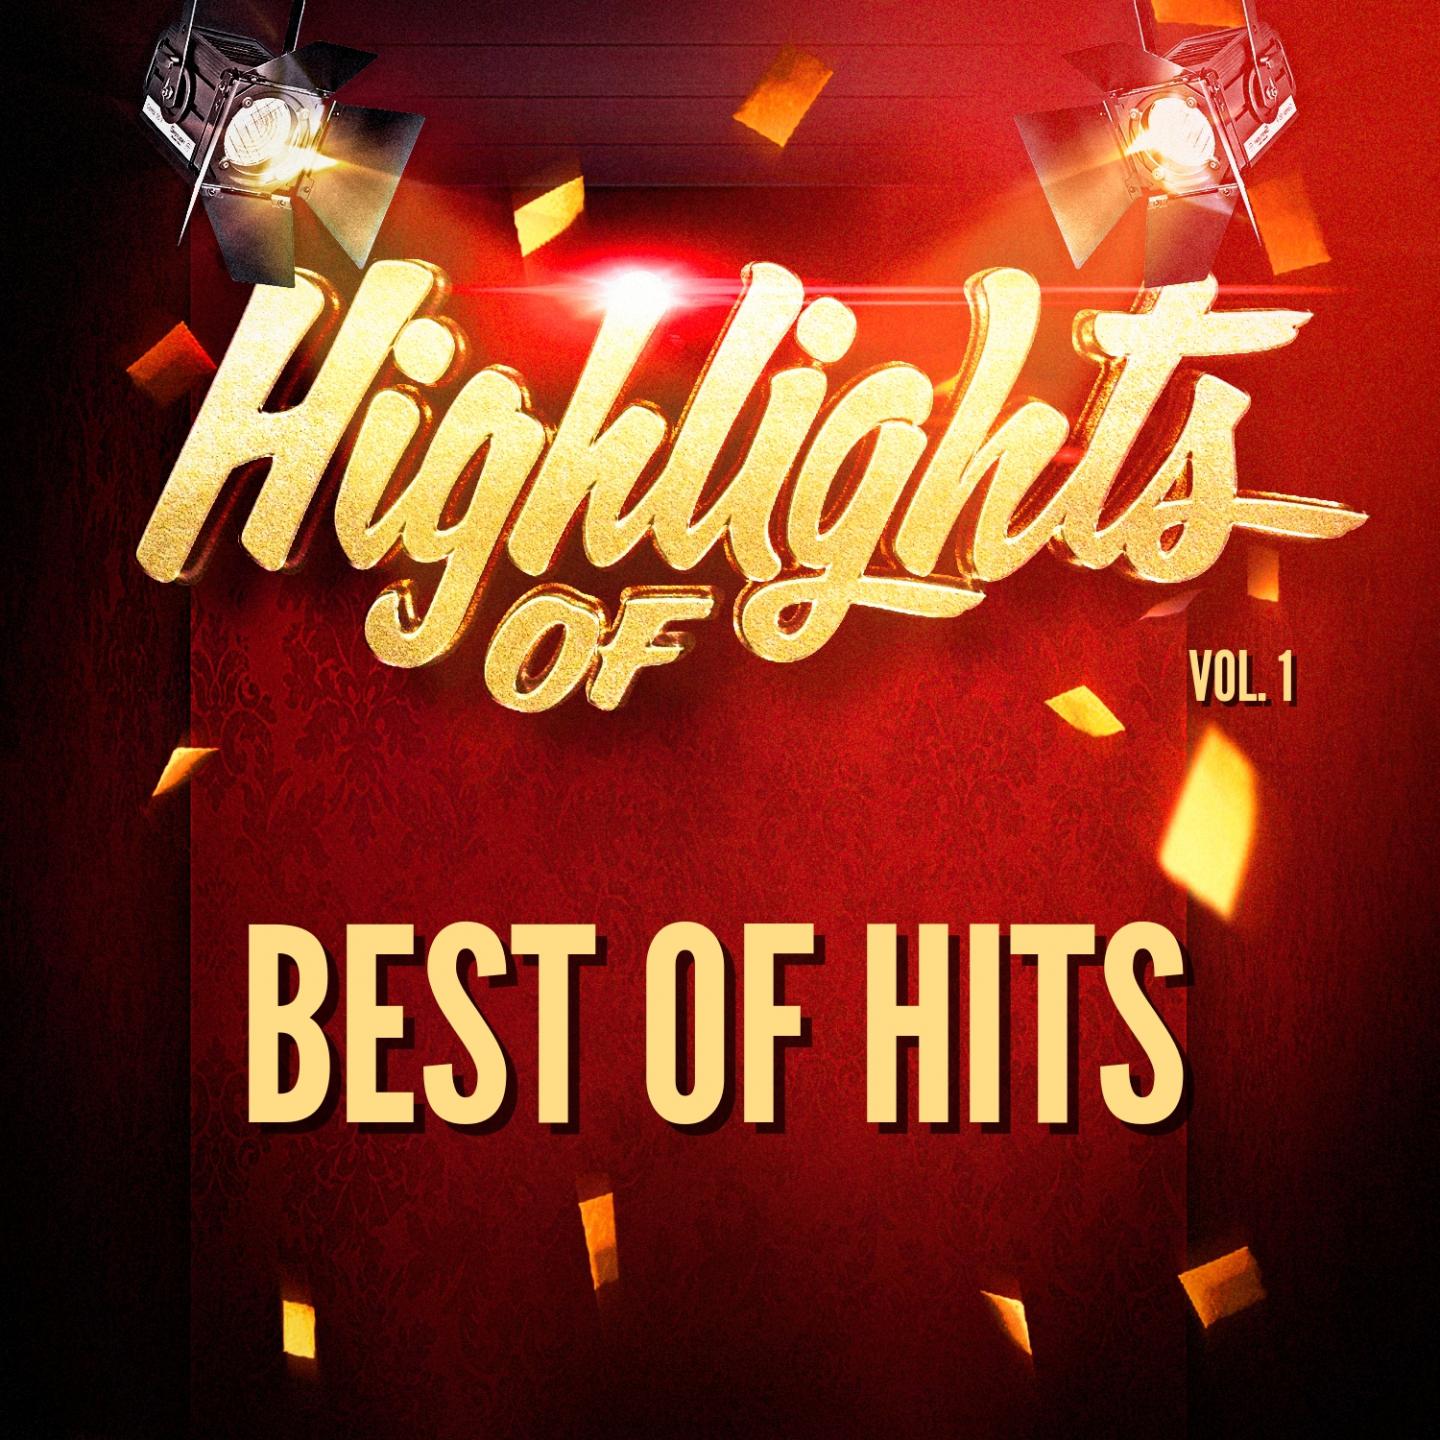 Highlights of Best of Hits, Vol. 1